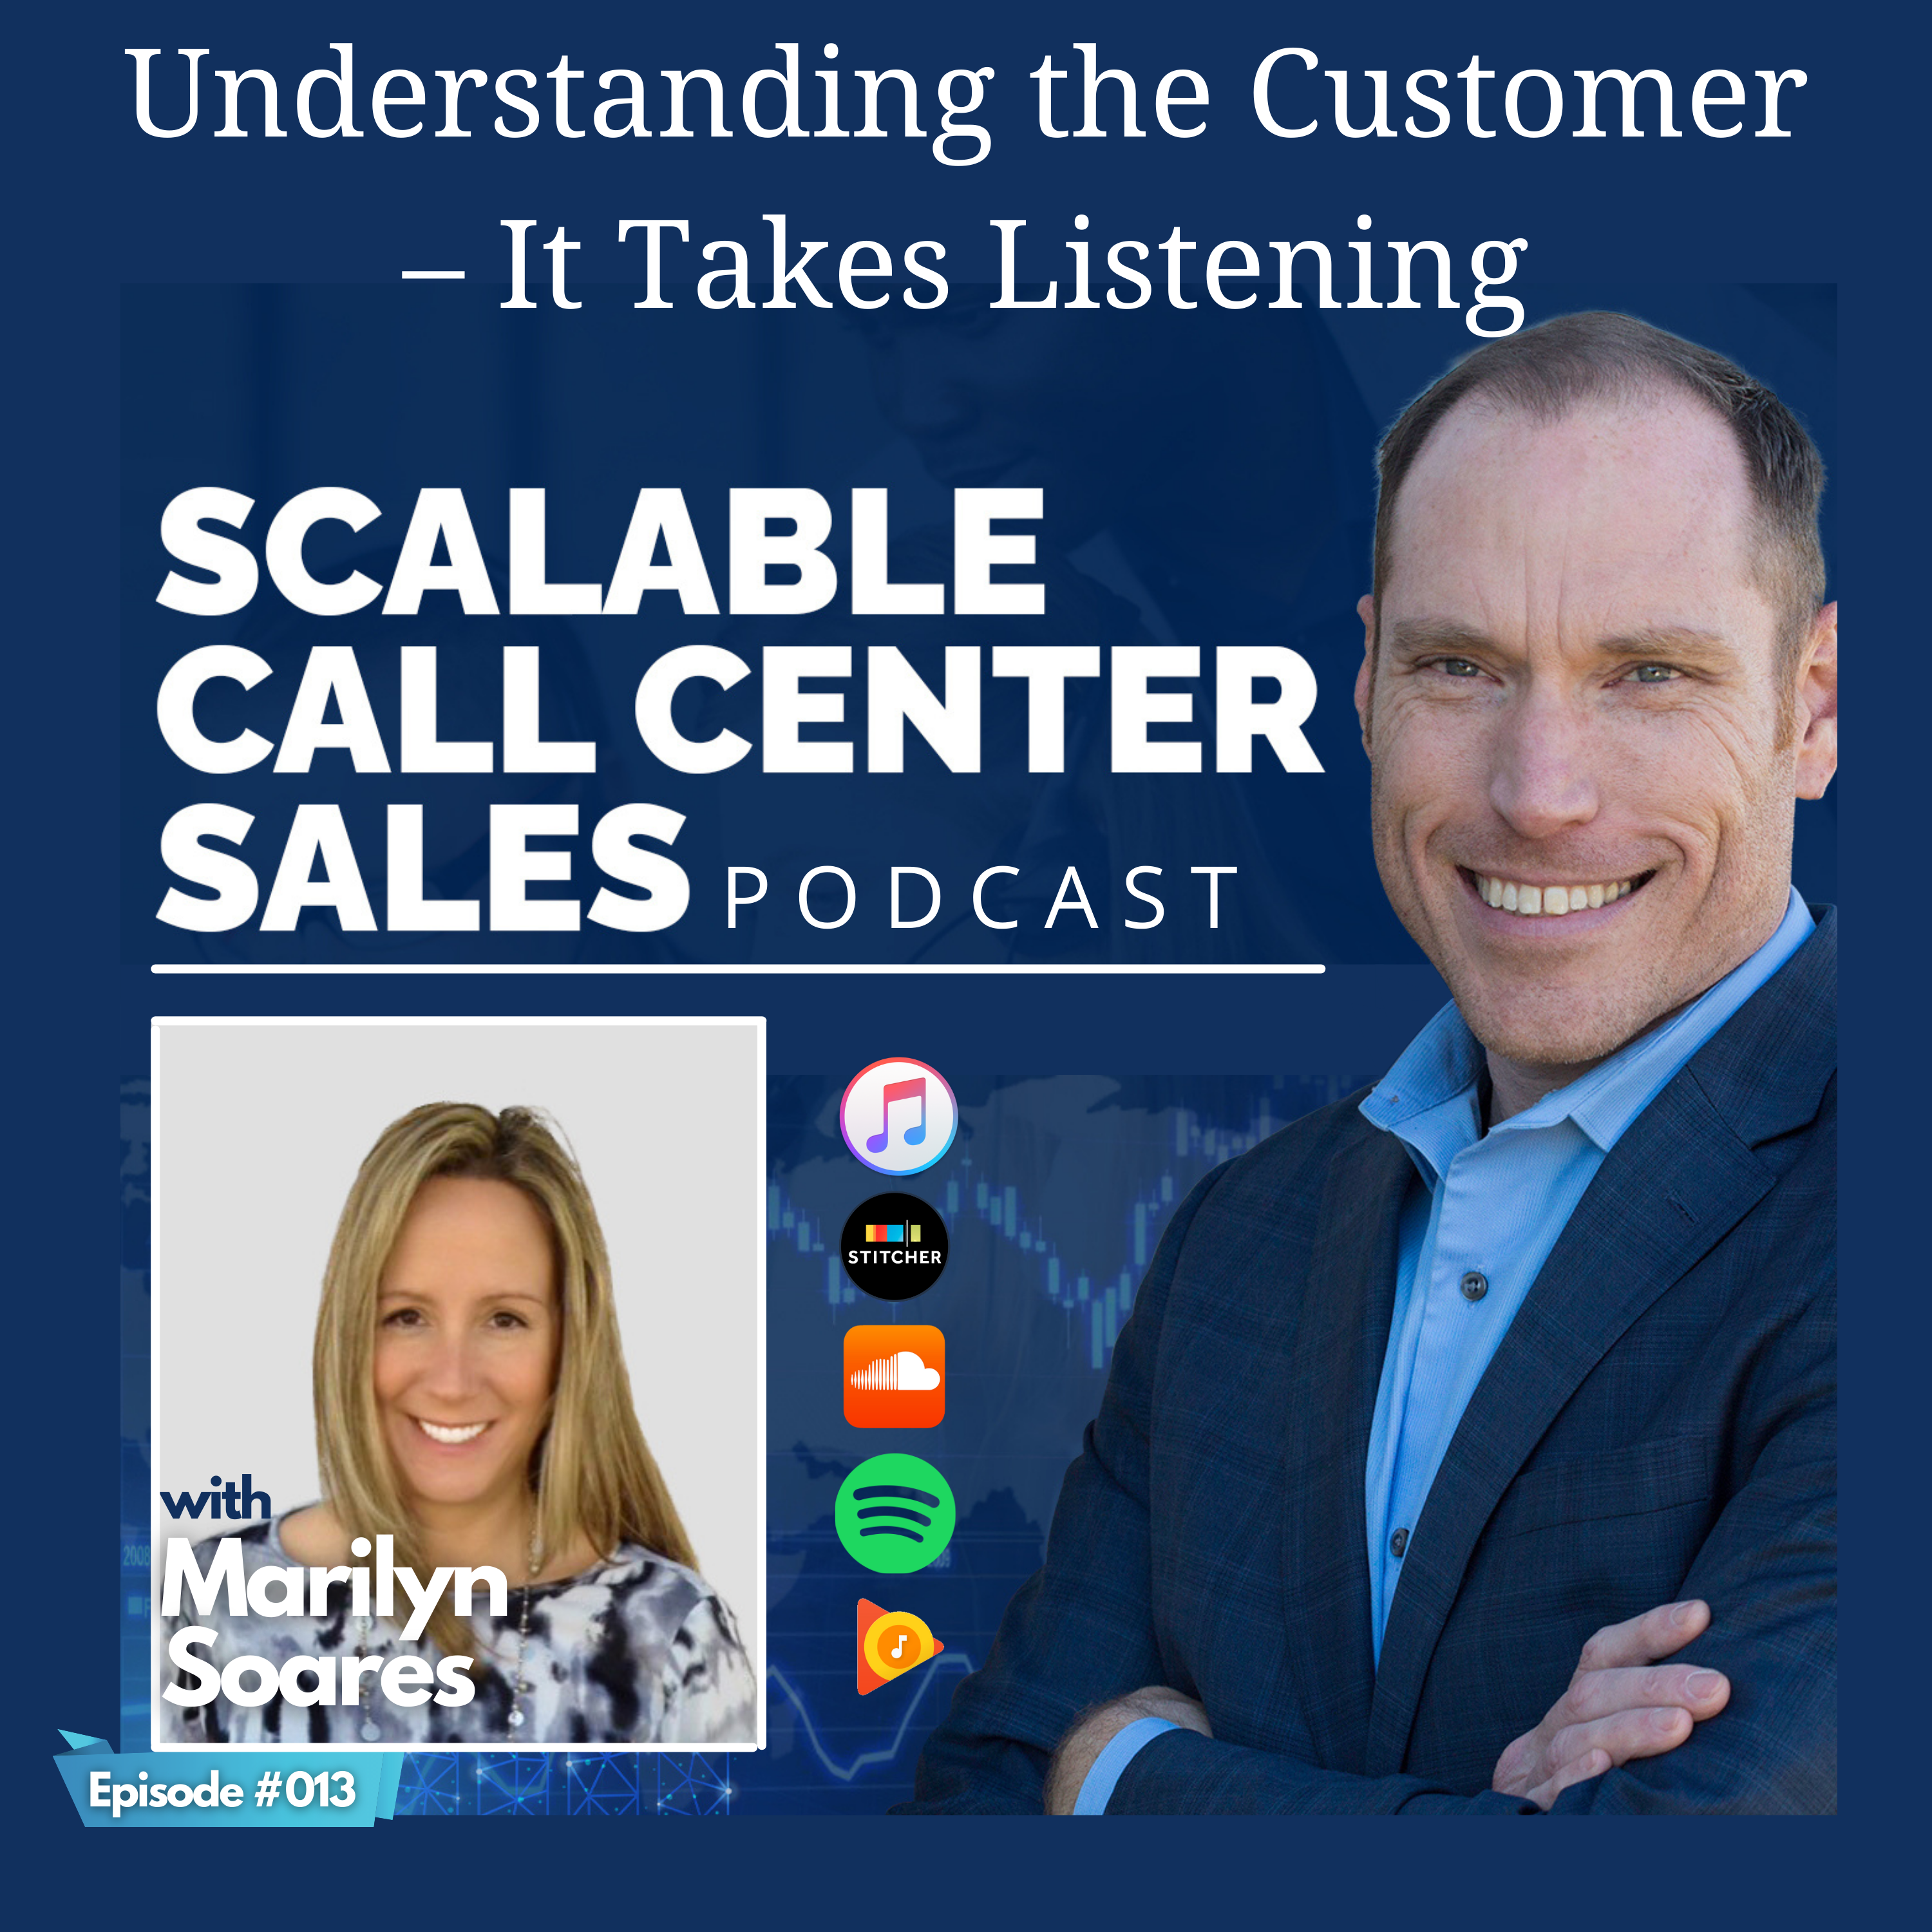 [013] Understanding the Customer – It Takes Listening, with Marilyn Soares from Transparent BPO